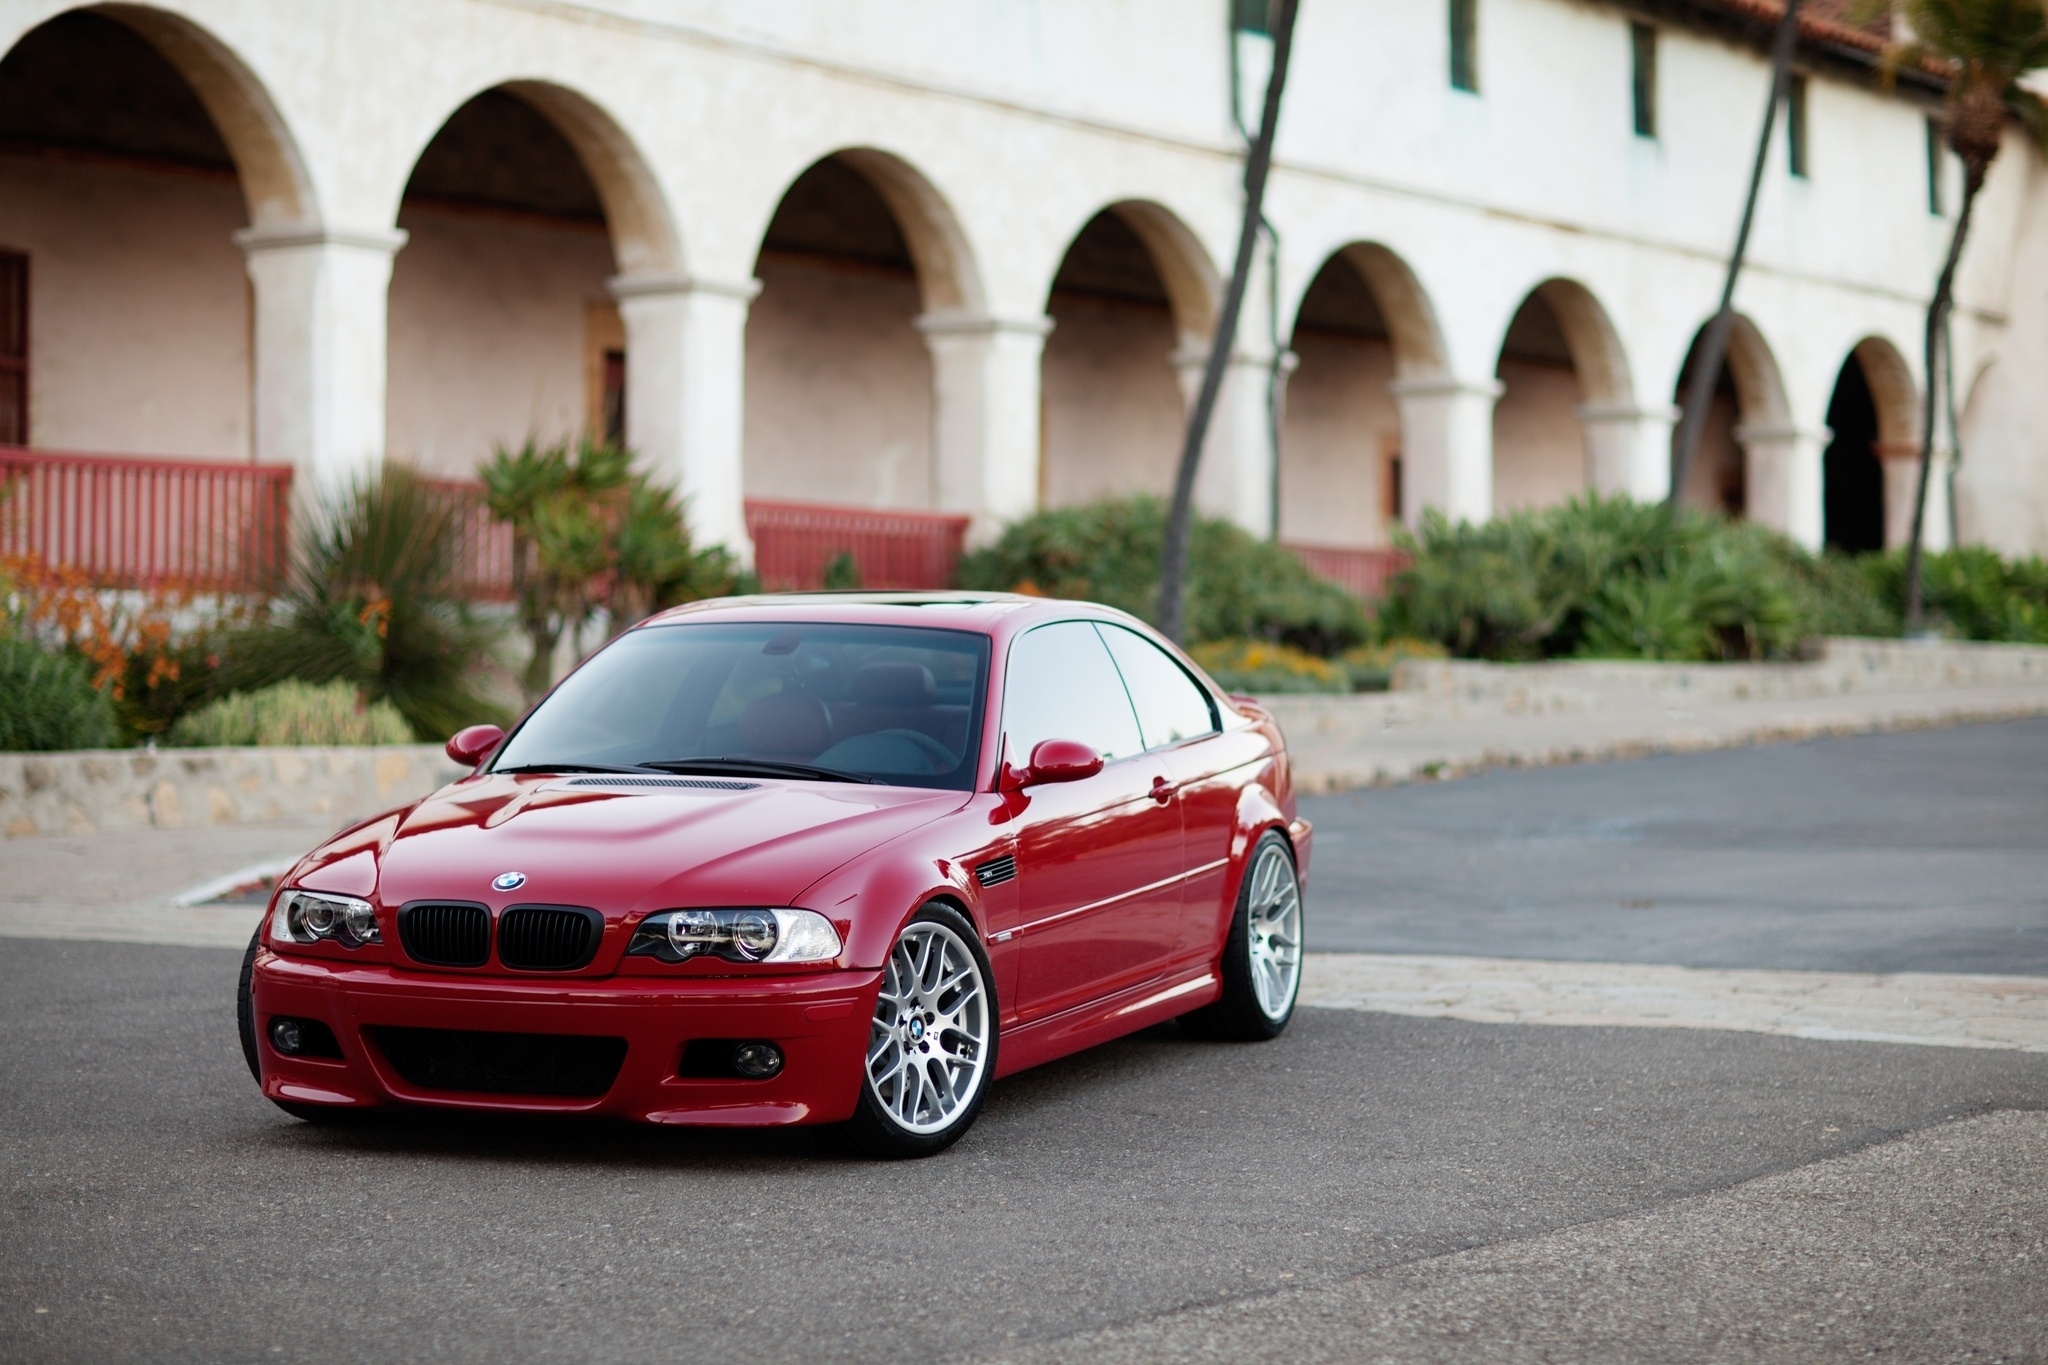 bmw, cars, red, building, e46, m3, coupe, compartment